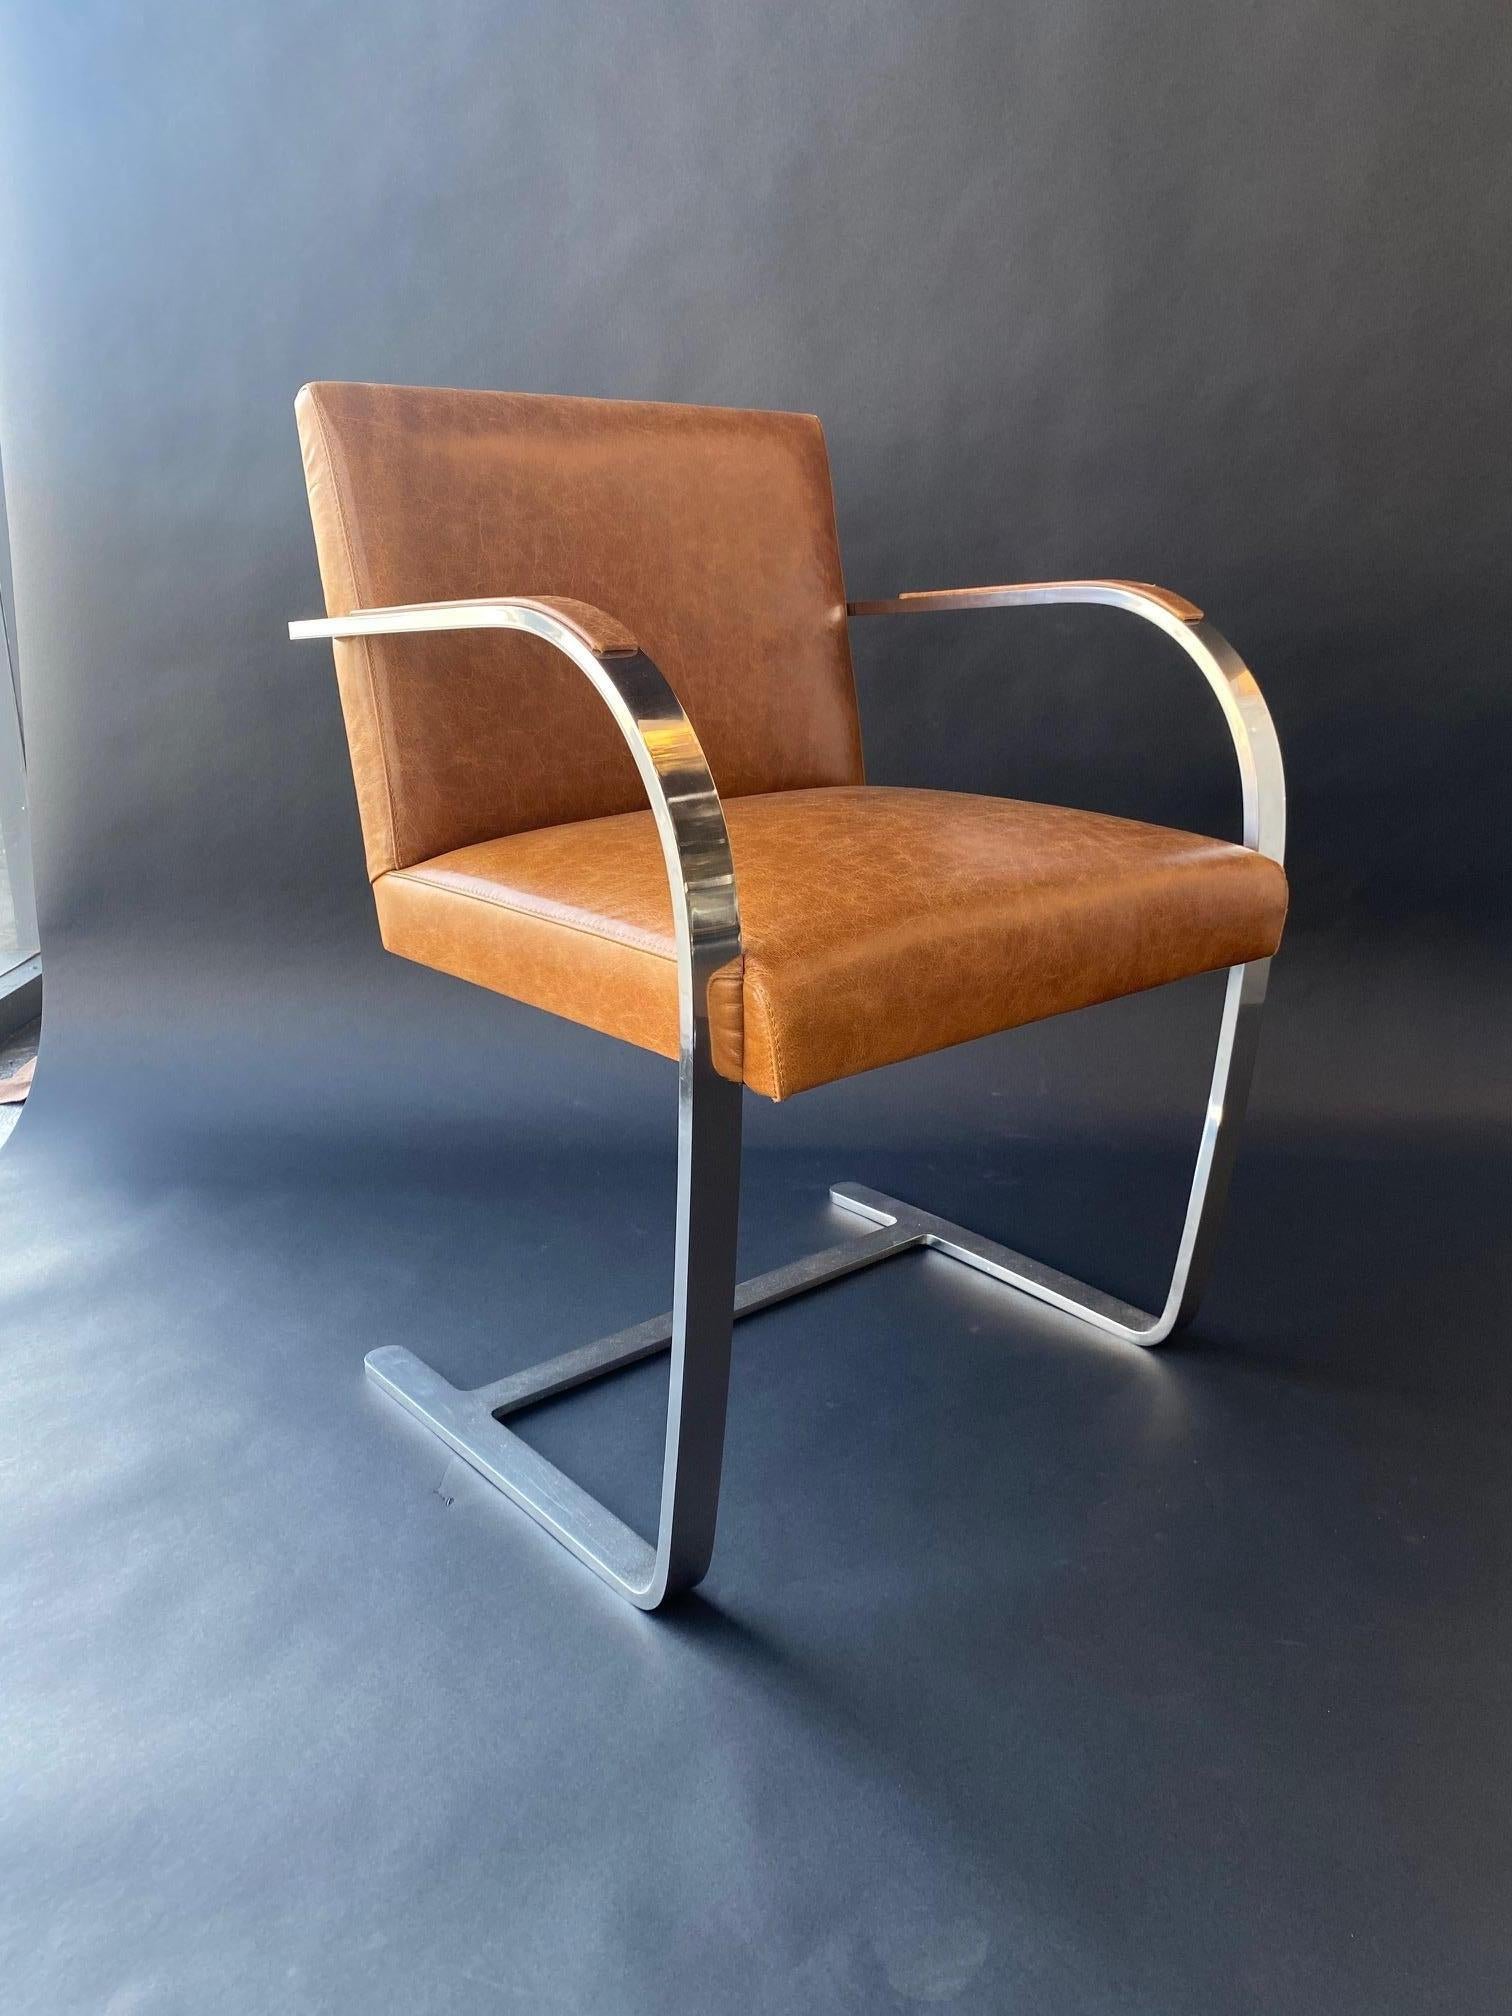 Set of six chairs by Ludwig Mies van der Rohe. Chairs are chrome-plated steeled and newly upholstered in leather.